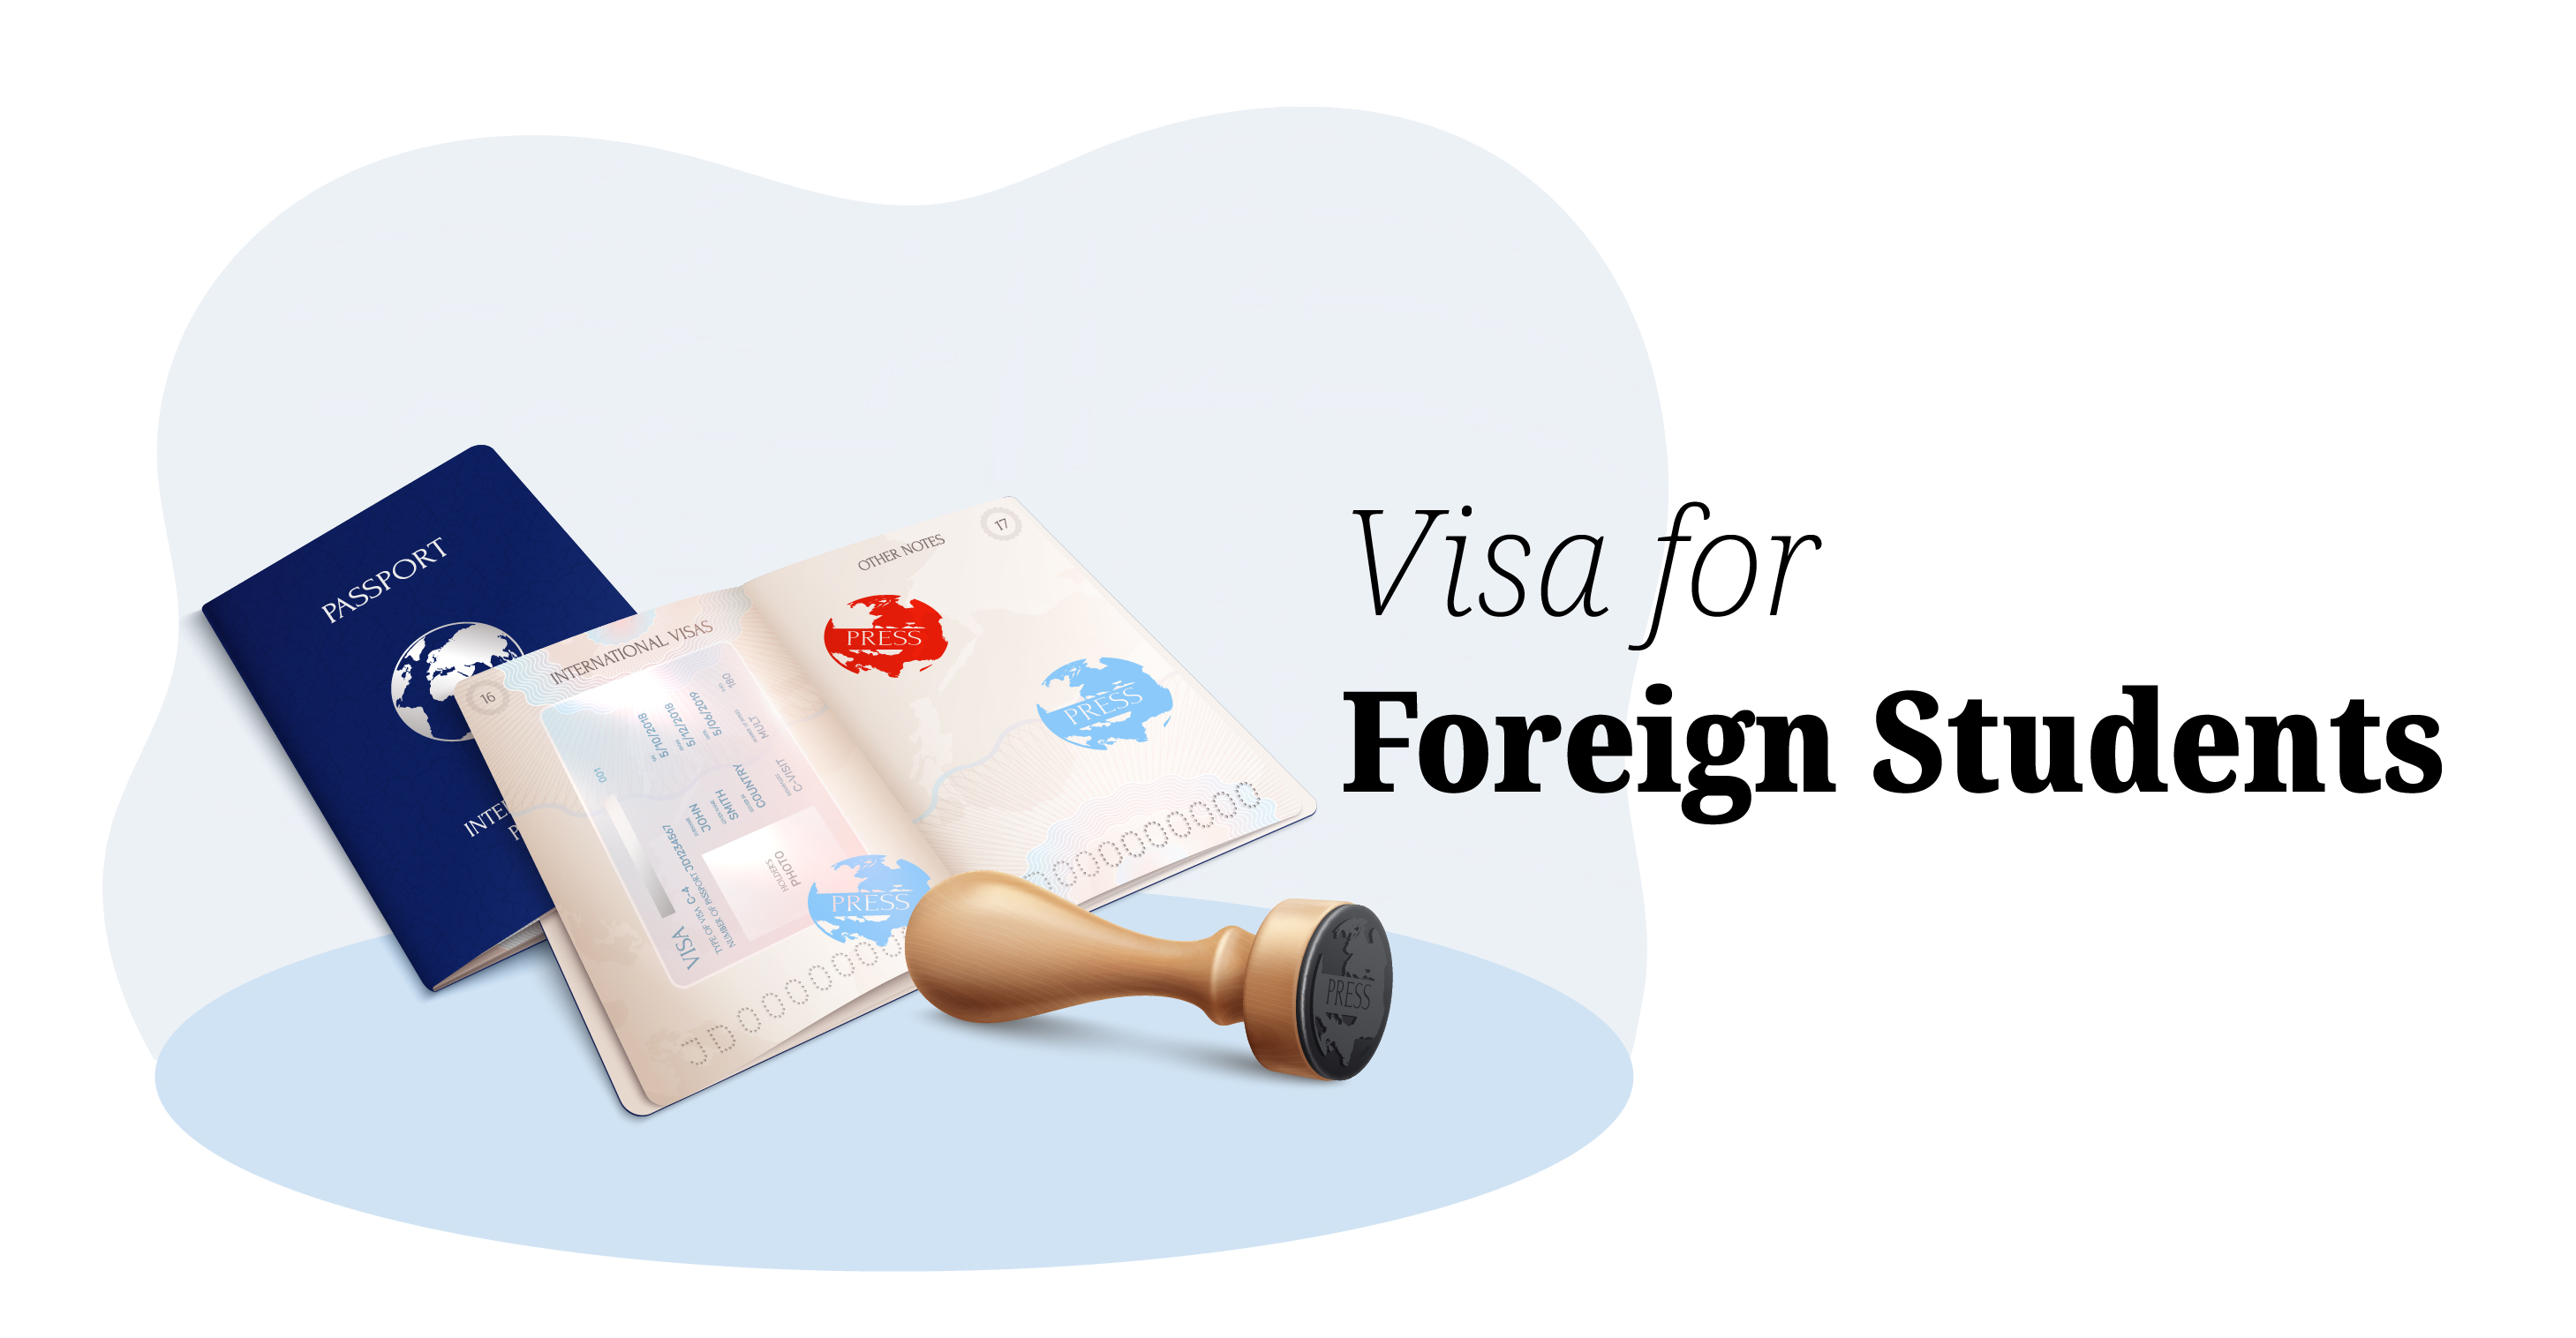 Visa for Foreign Students